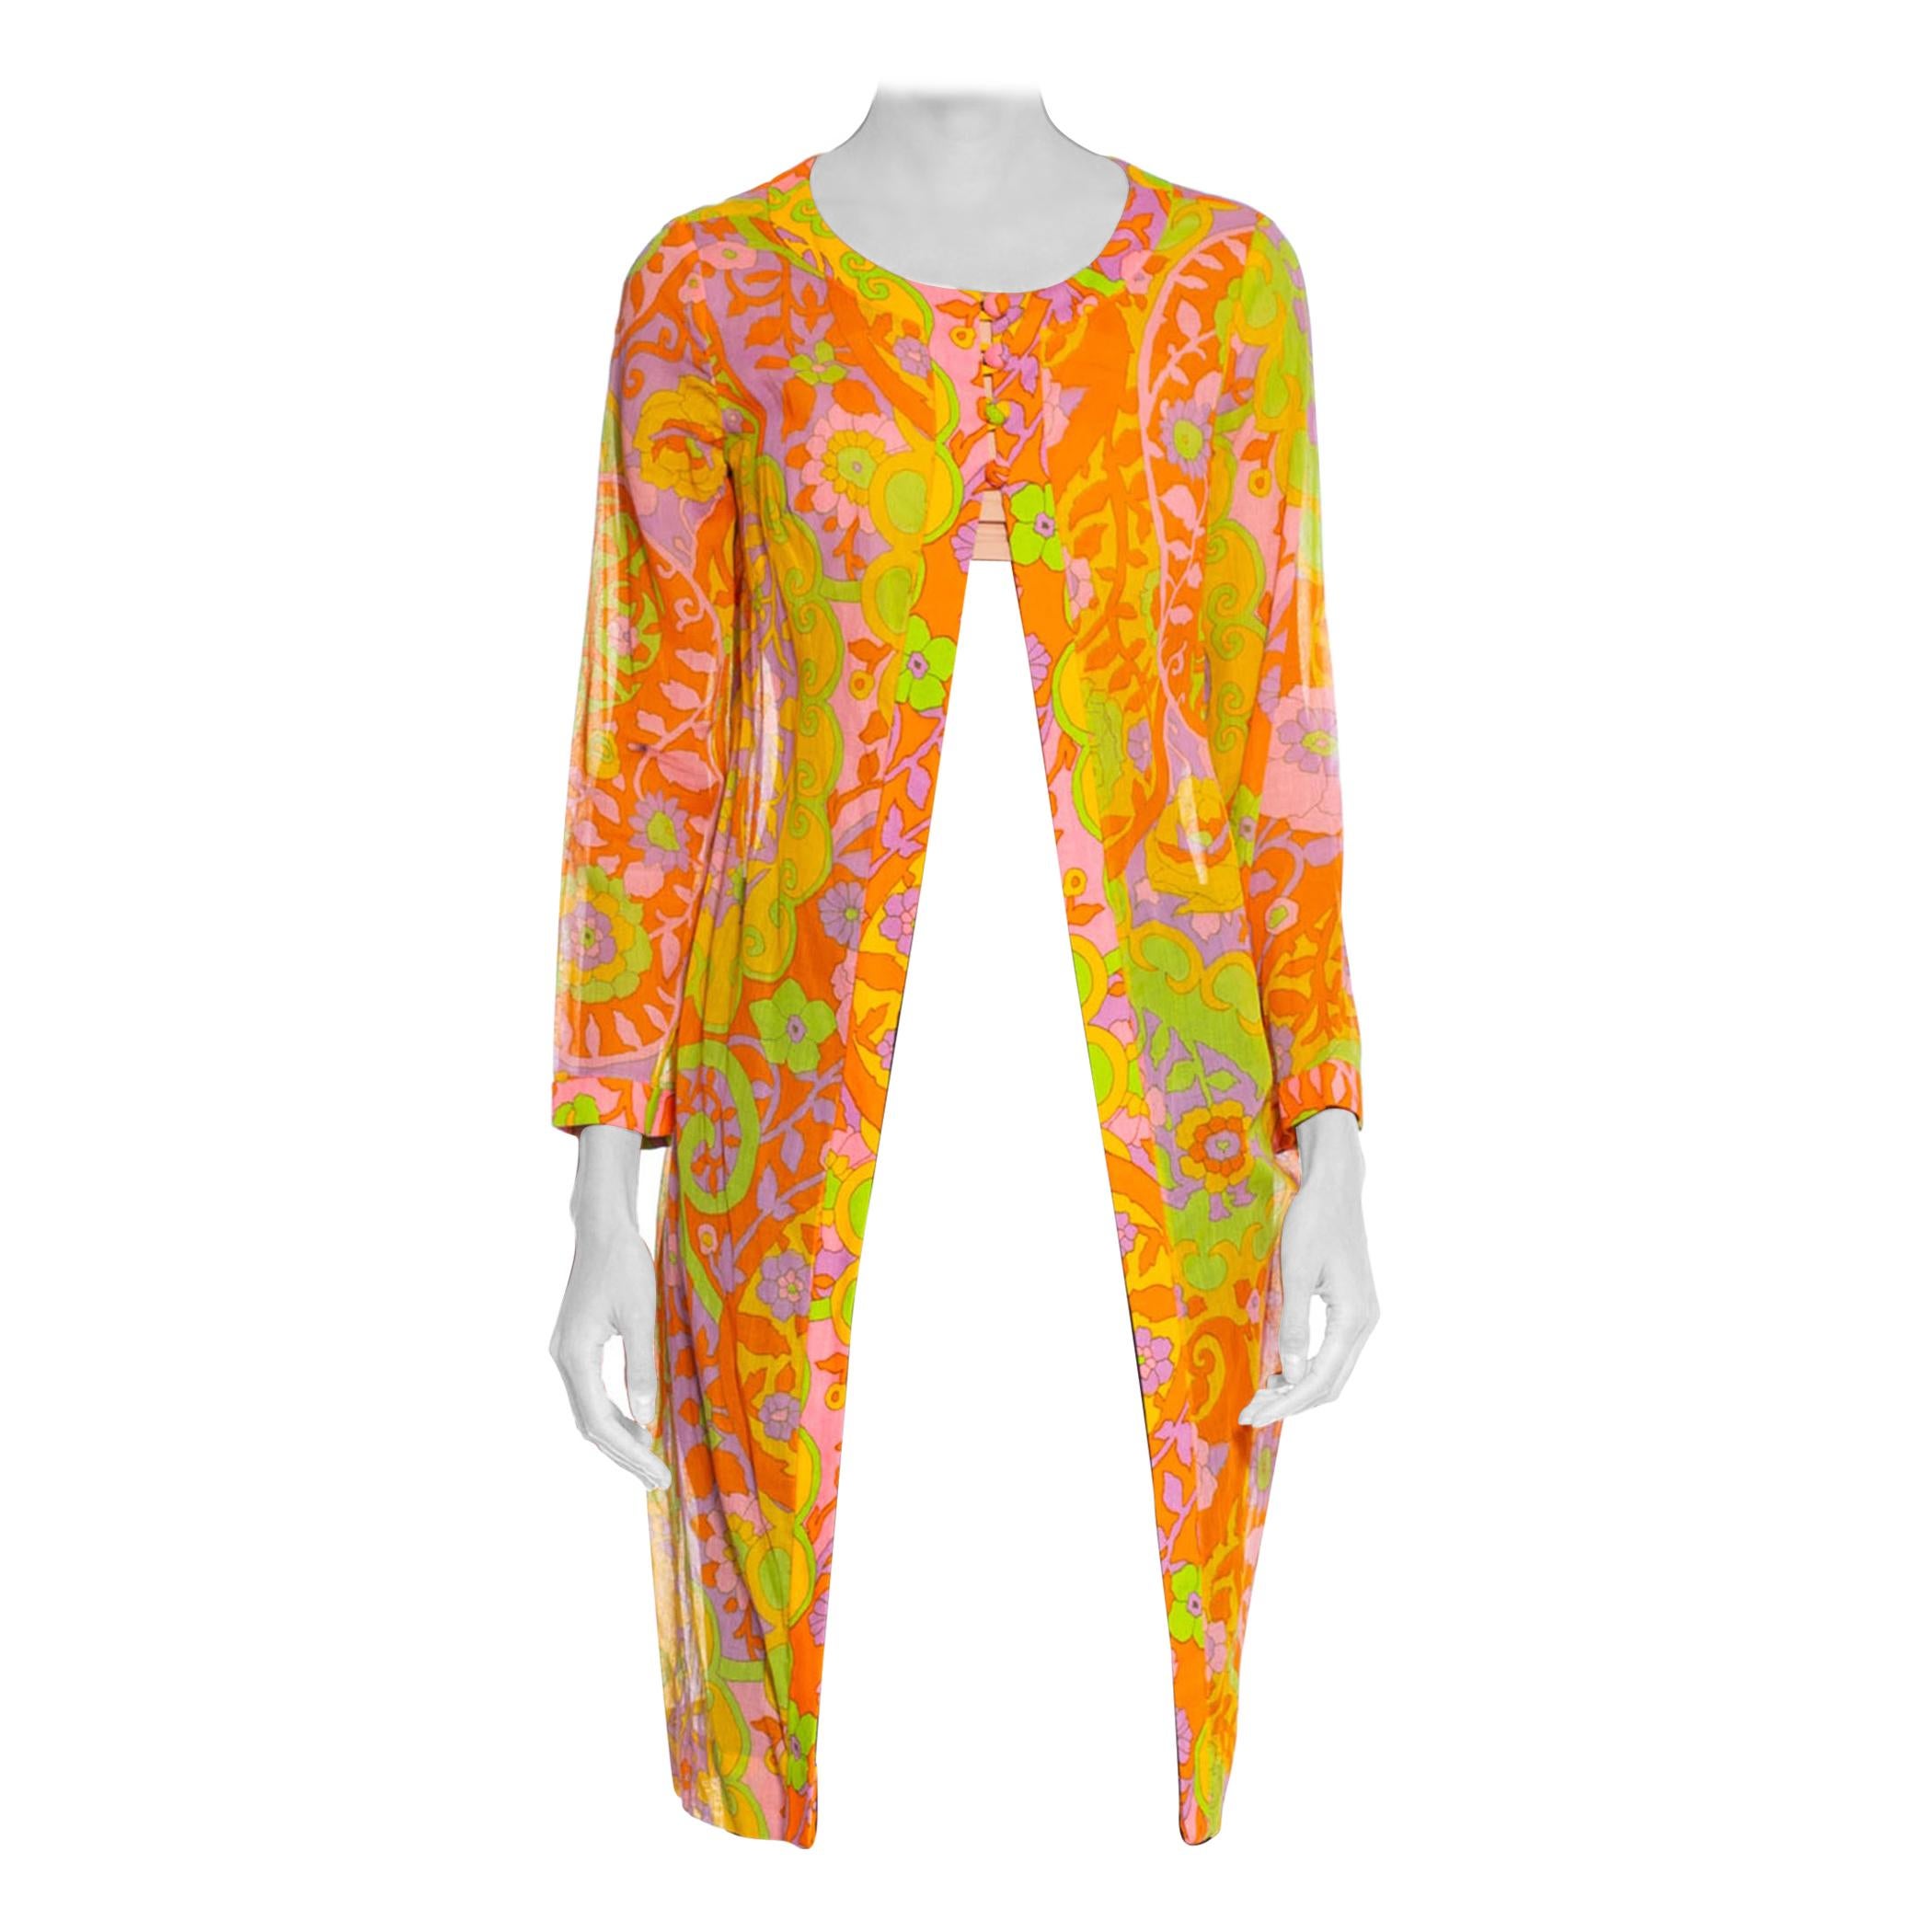 1960S Lime Green & Orange Cotton Voile Mod Psychedelic Floral Tunic Jacket Top